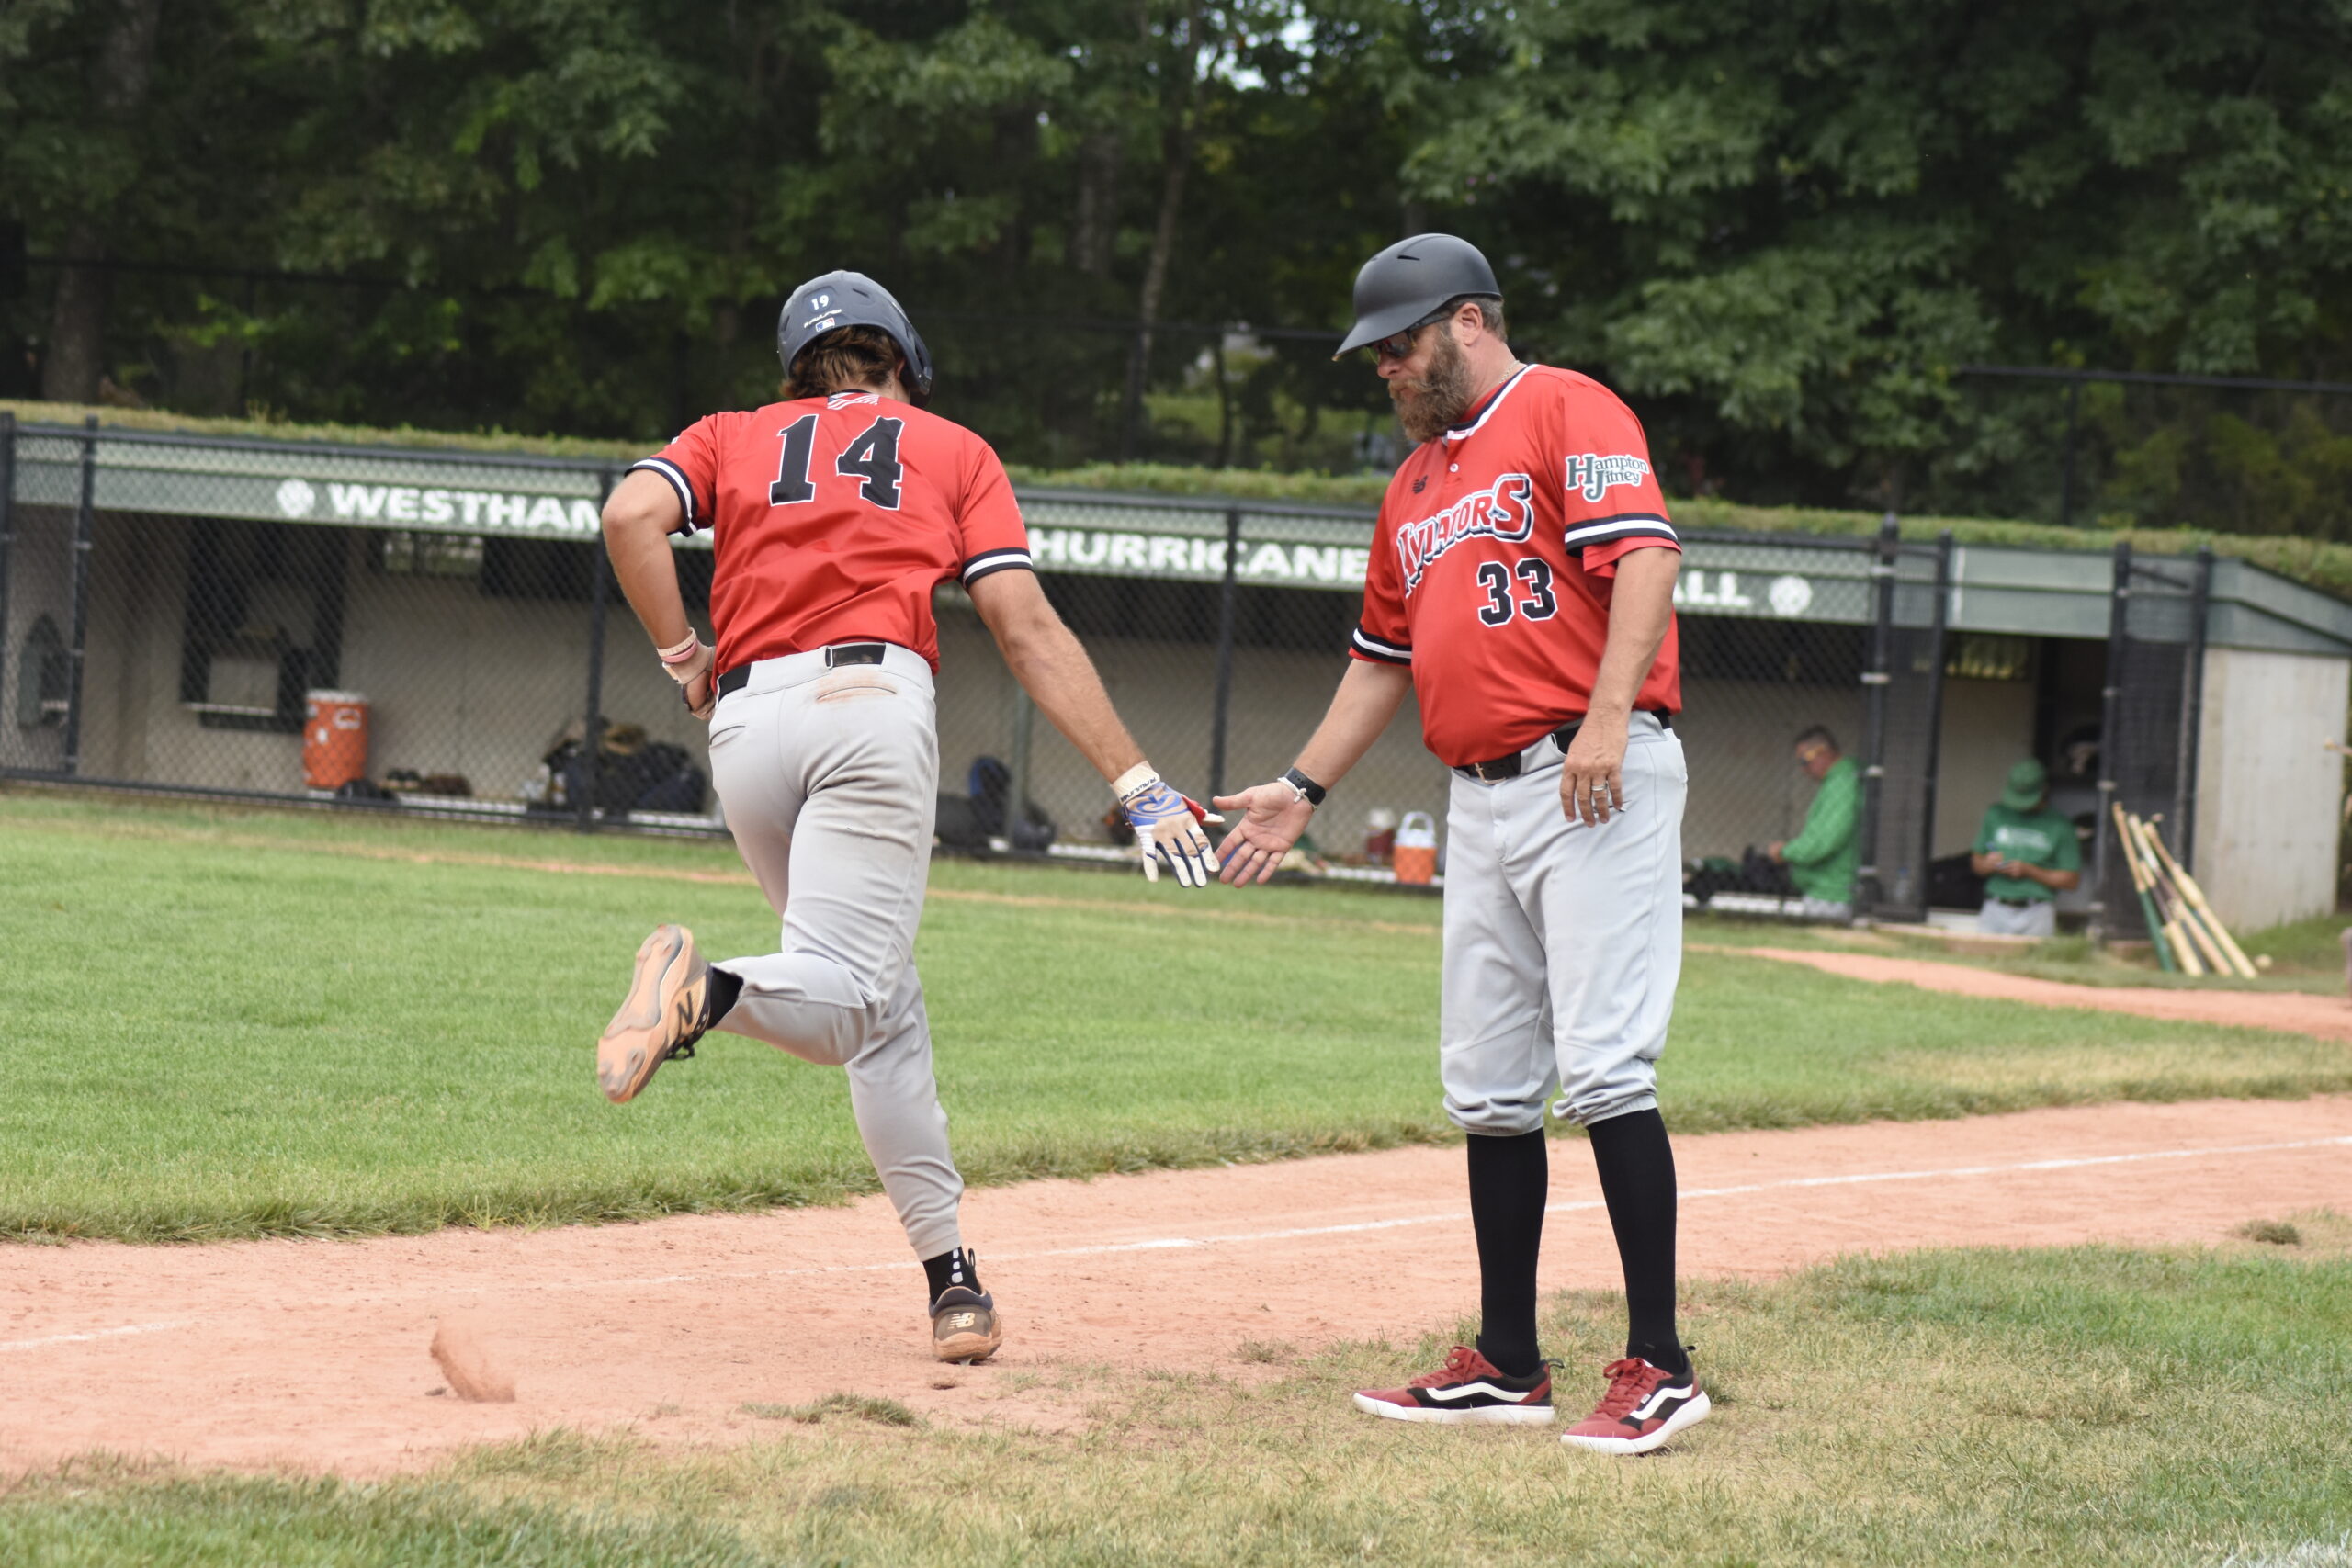 Jack Halloran is congratulated by manager Jason Jacome as he rounds third base.    DREW BUDD